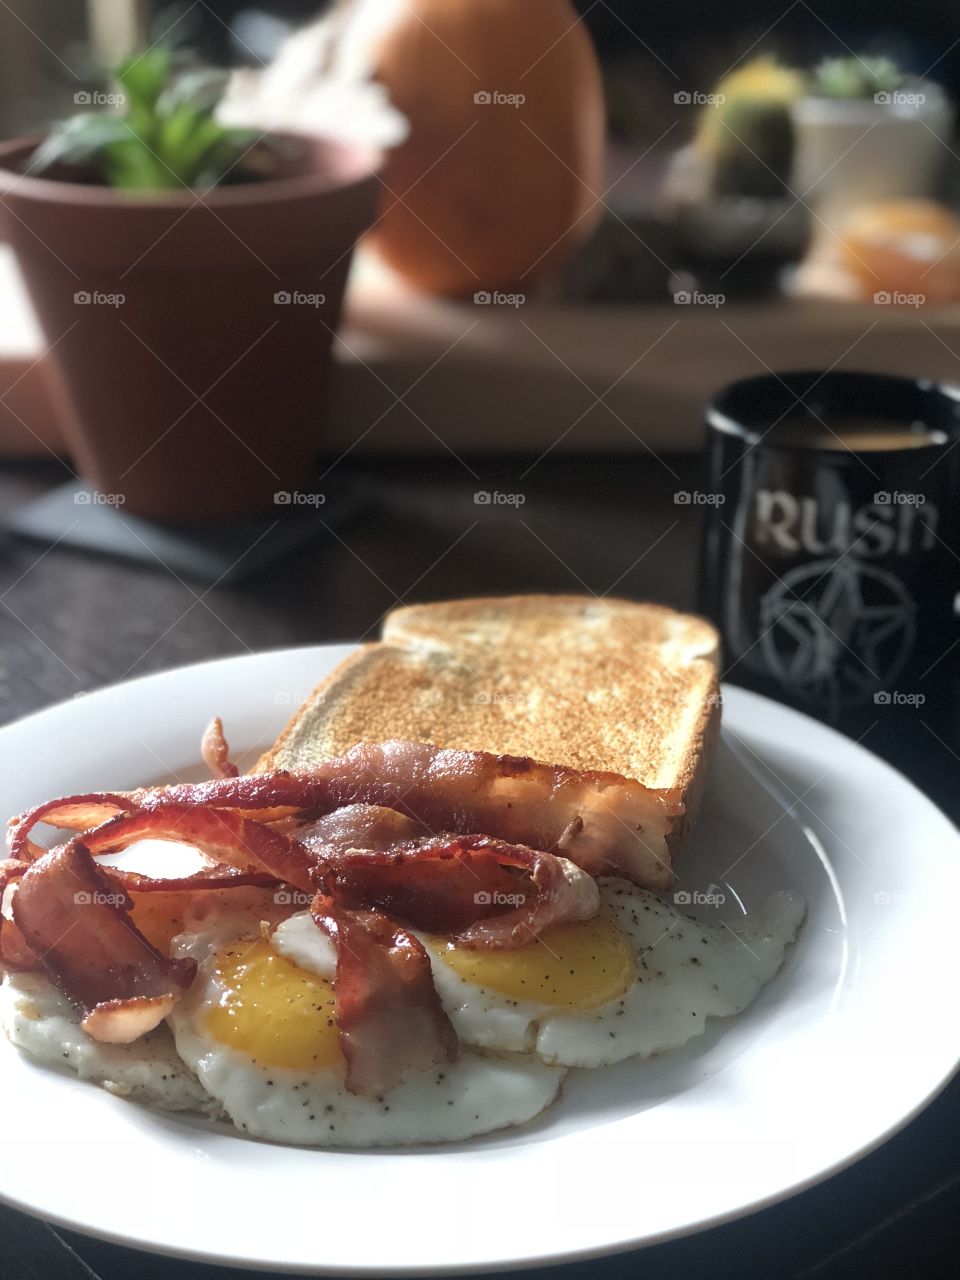 Relaxing morning with breakfast and coffee. Gotta love a good start to the day.